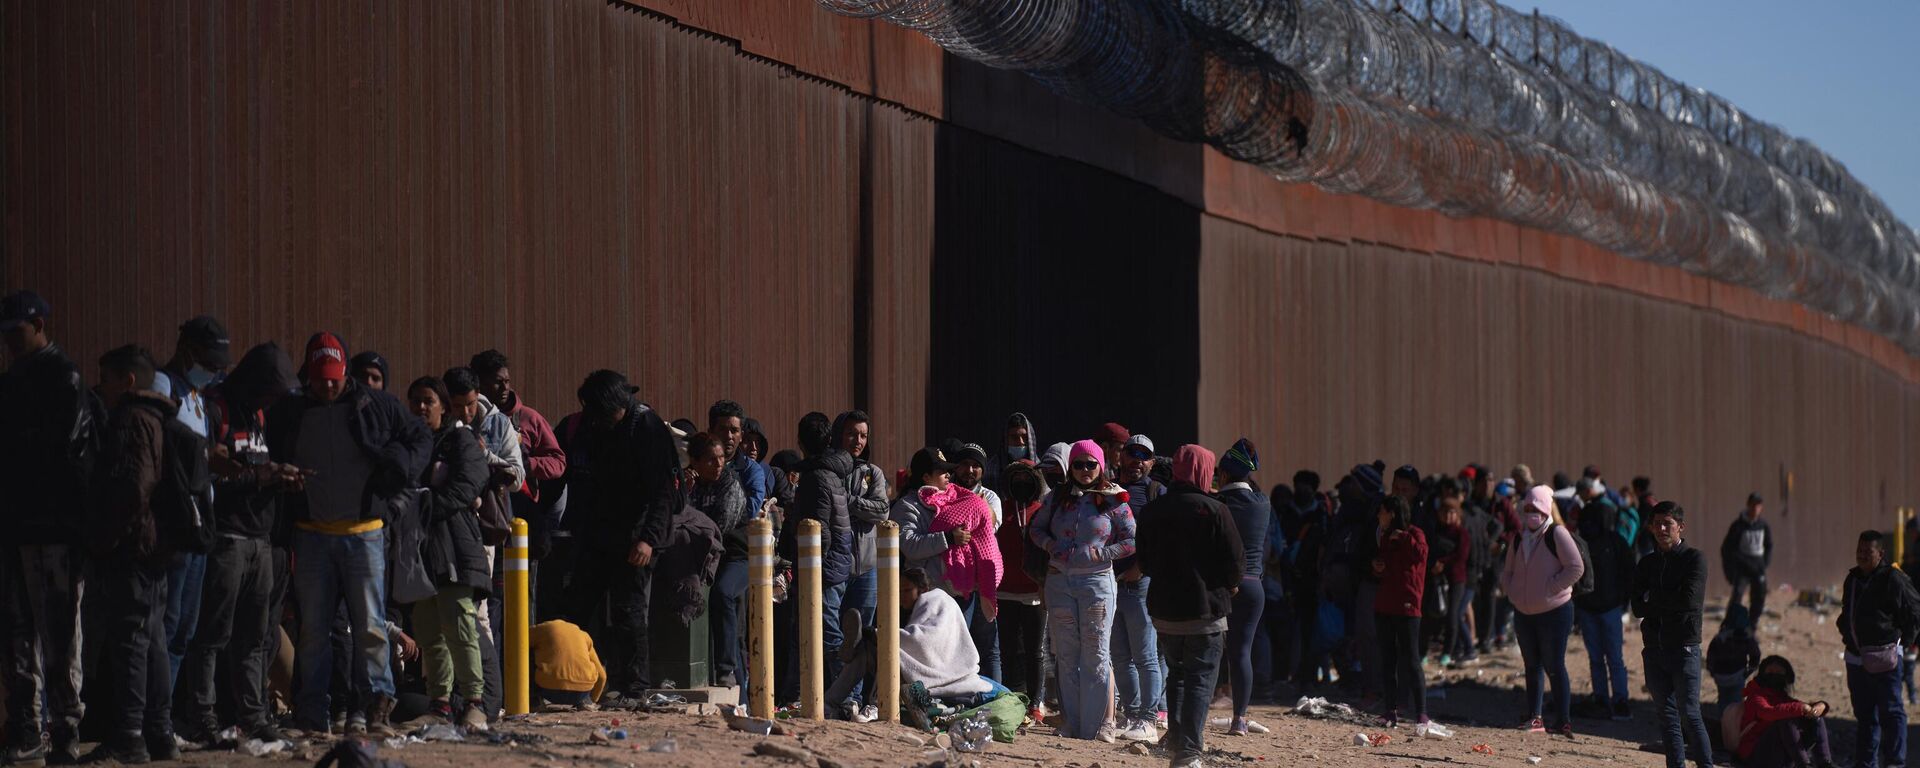 Hundreds of migrants line up to be processed by THE US Border Patrol under the Stanton Street Bridge after illegally entering the US, in El Paso, Texas, on December 22, 2022 - Sputnik International, 1920, 26.02.2023